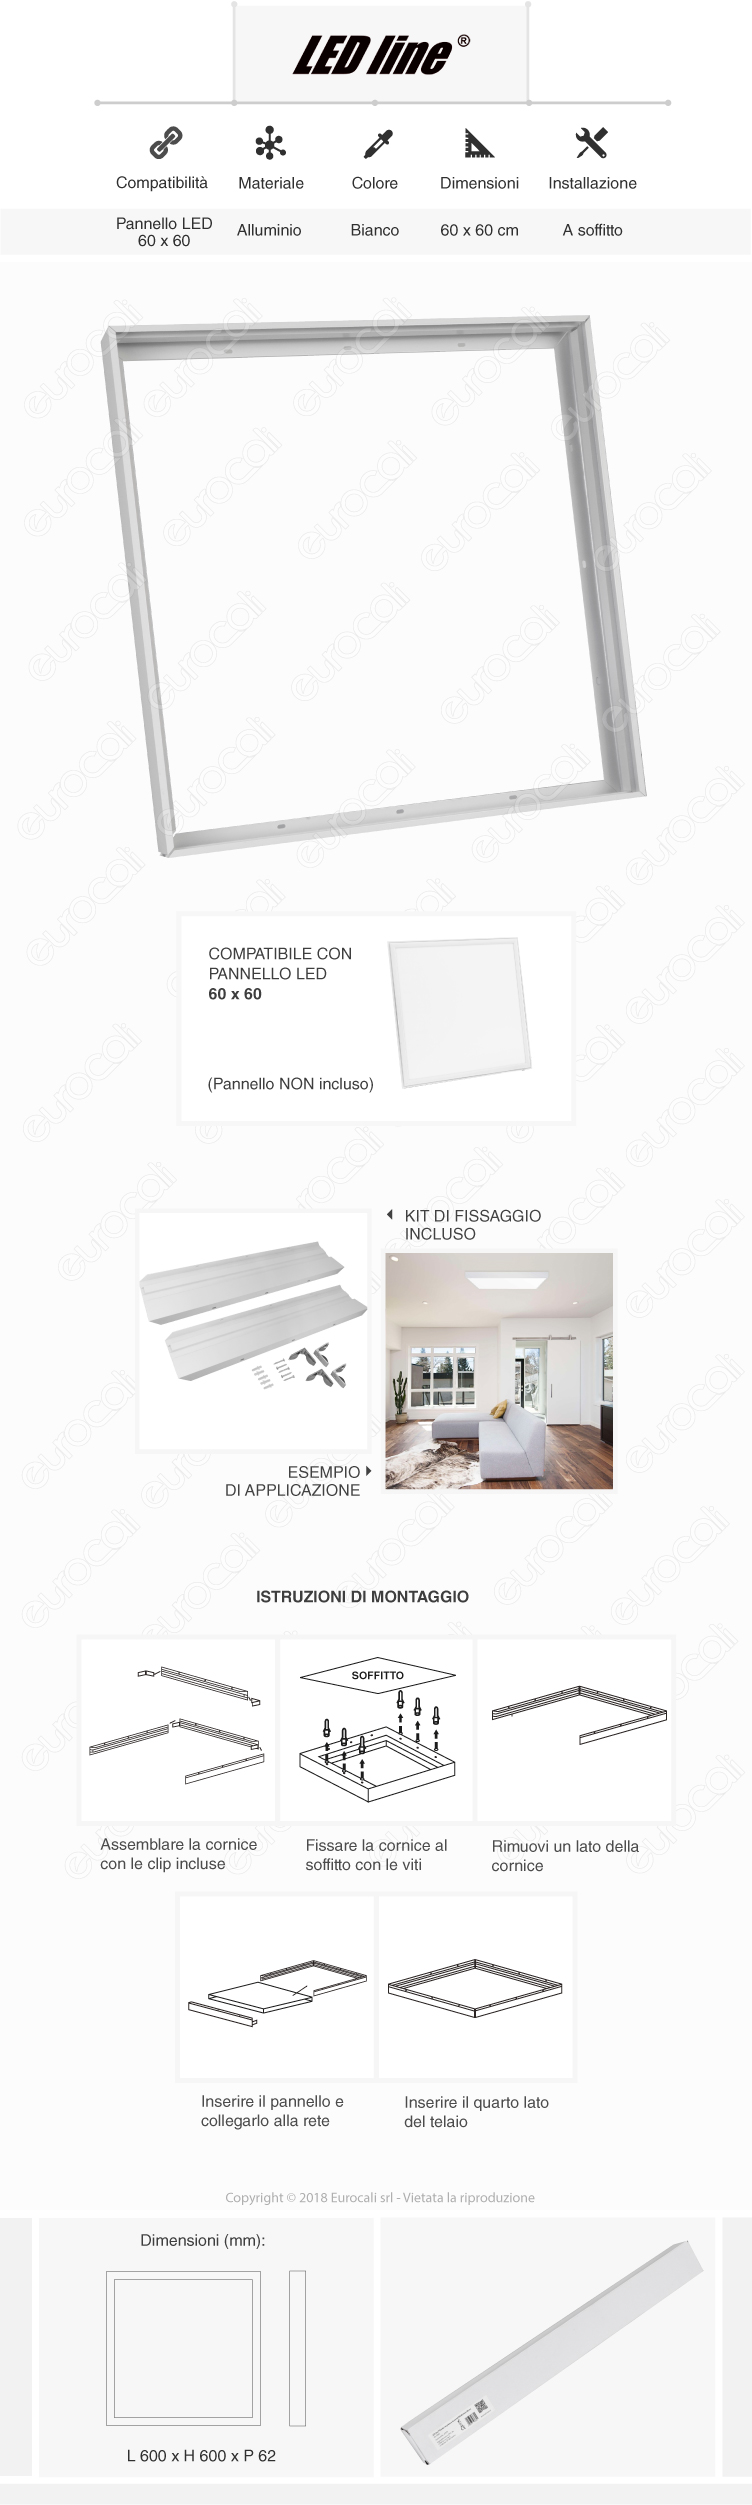 led line mounting frame cornice bianca fissaggio pannelli 60x60 soffitto